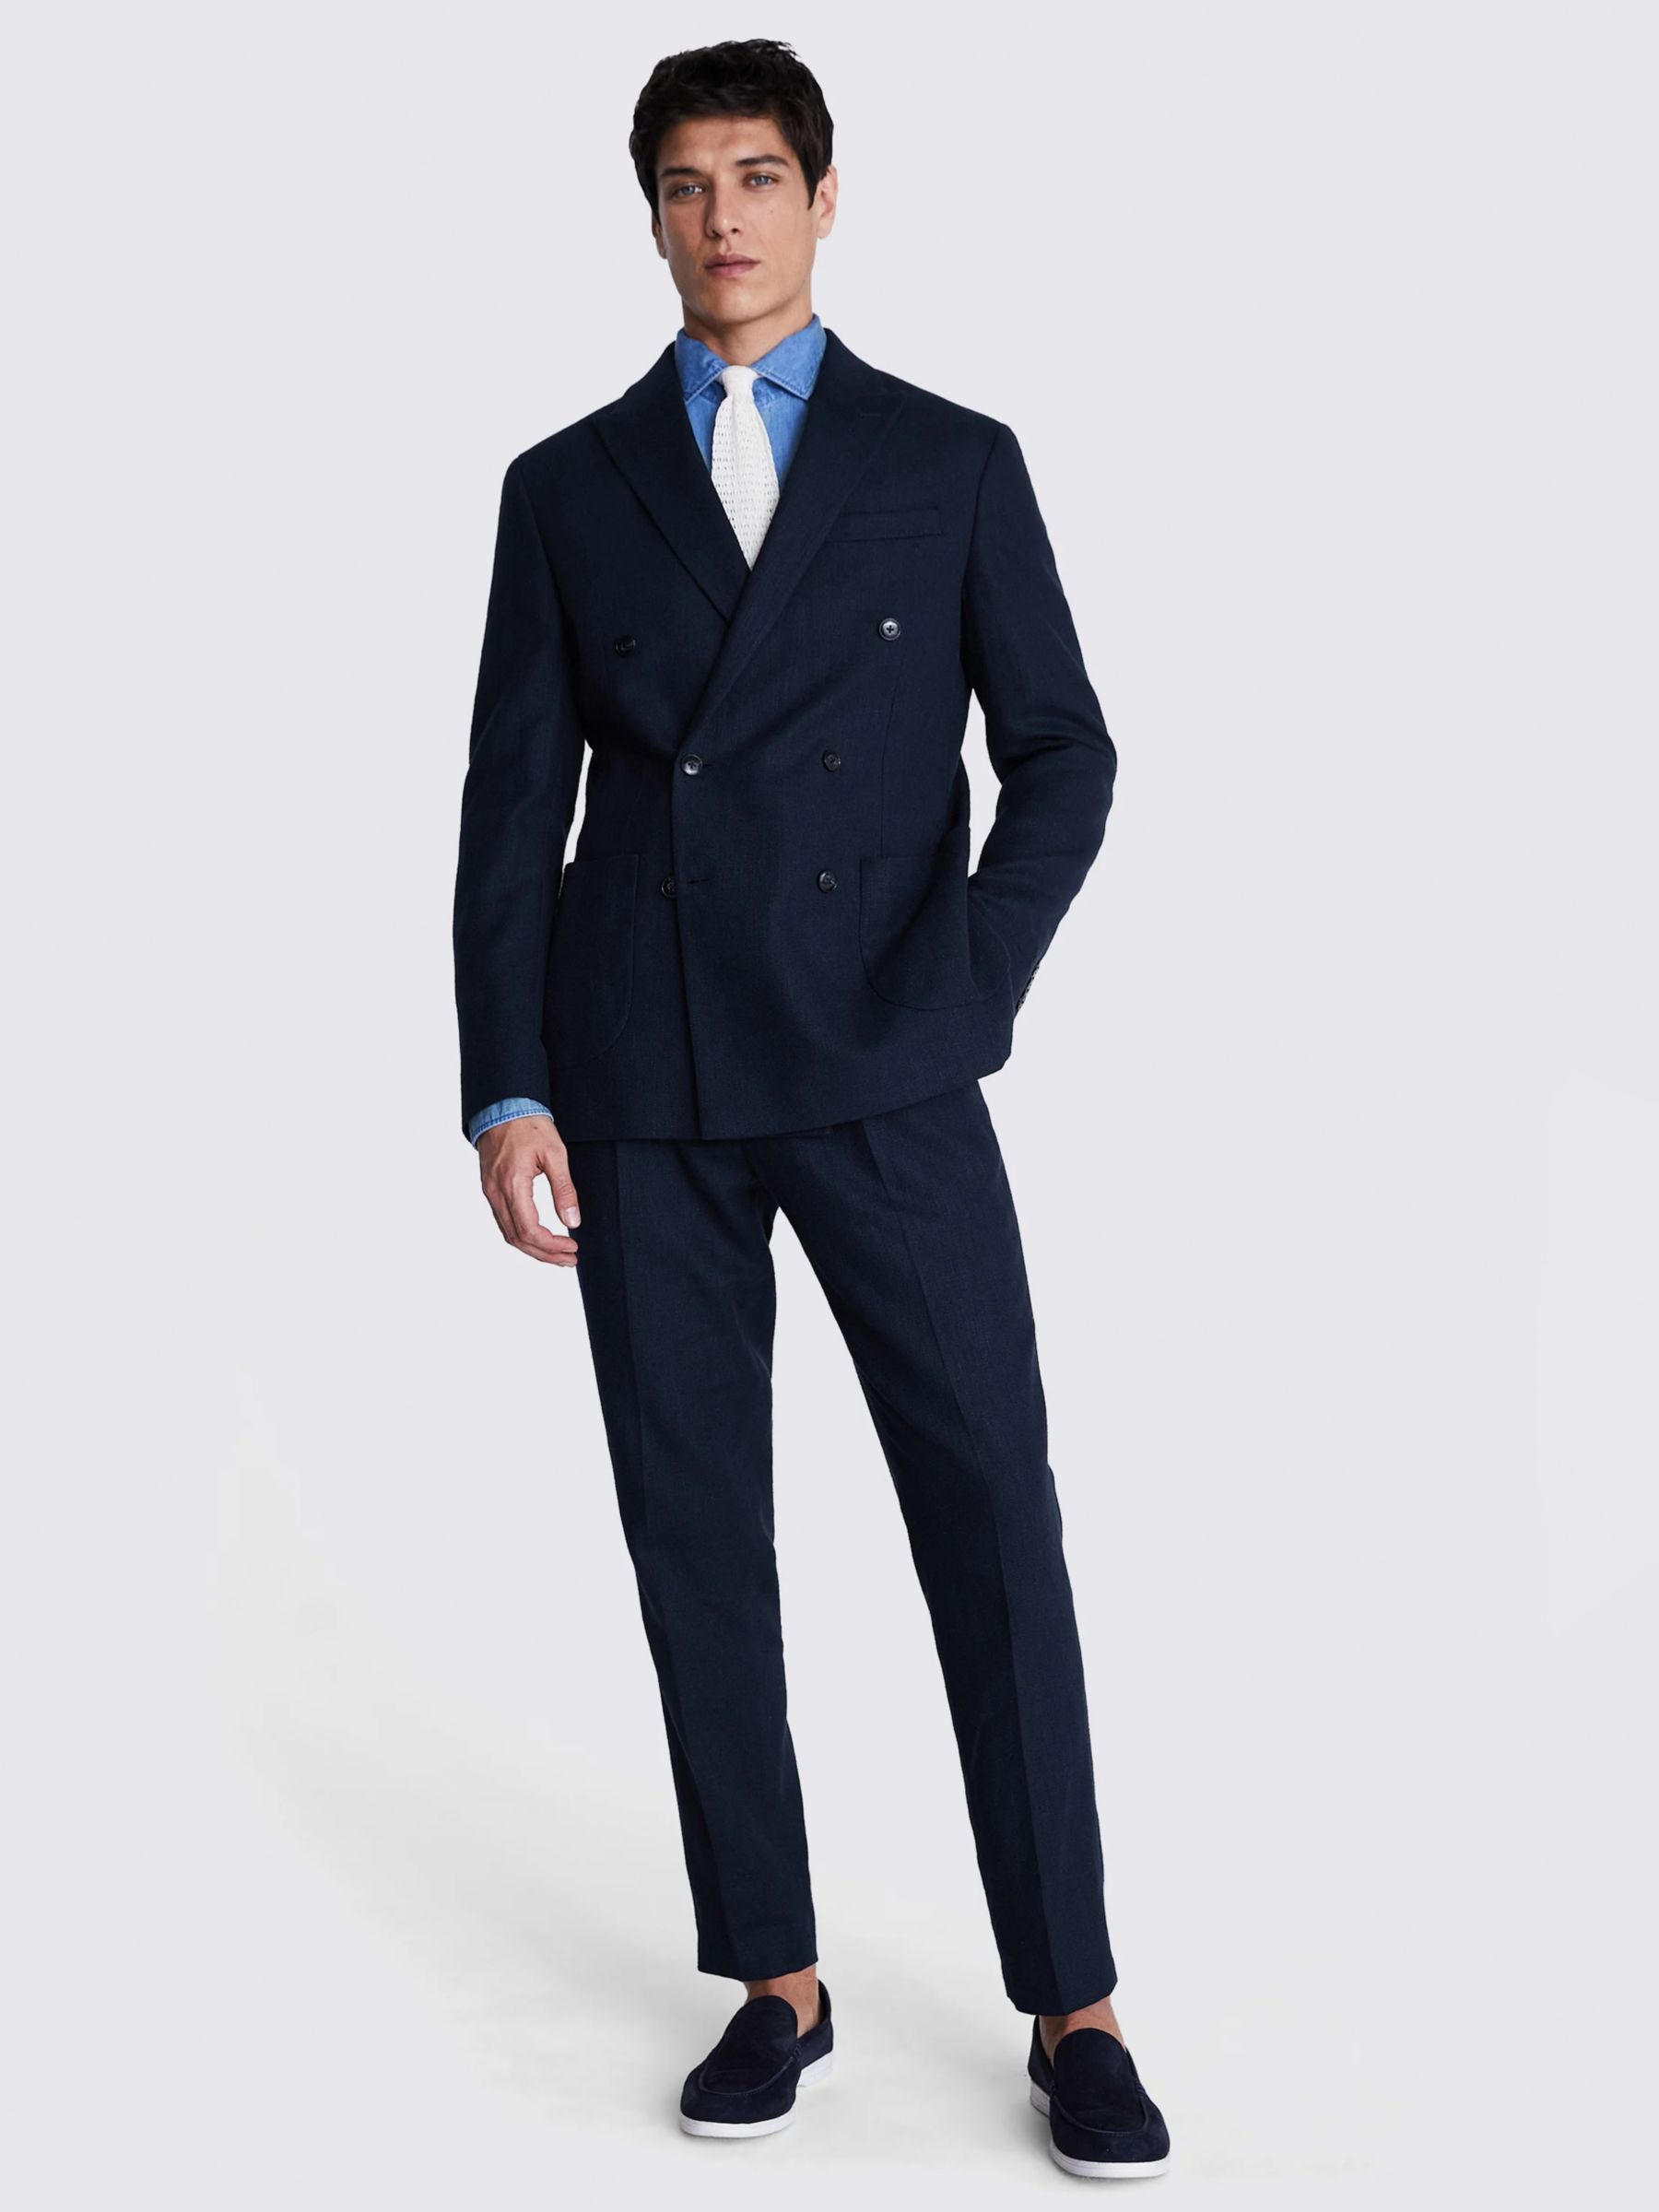 Moss Tailored Fit Double Breasted Herringbone Suit Jacket, Navy, 36R